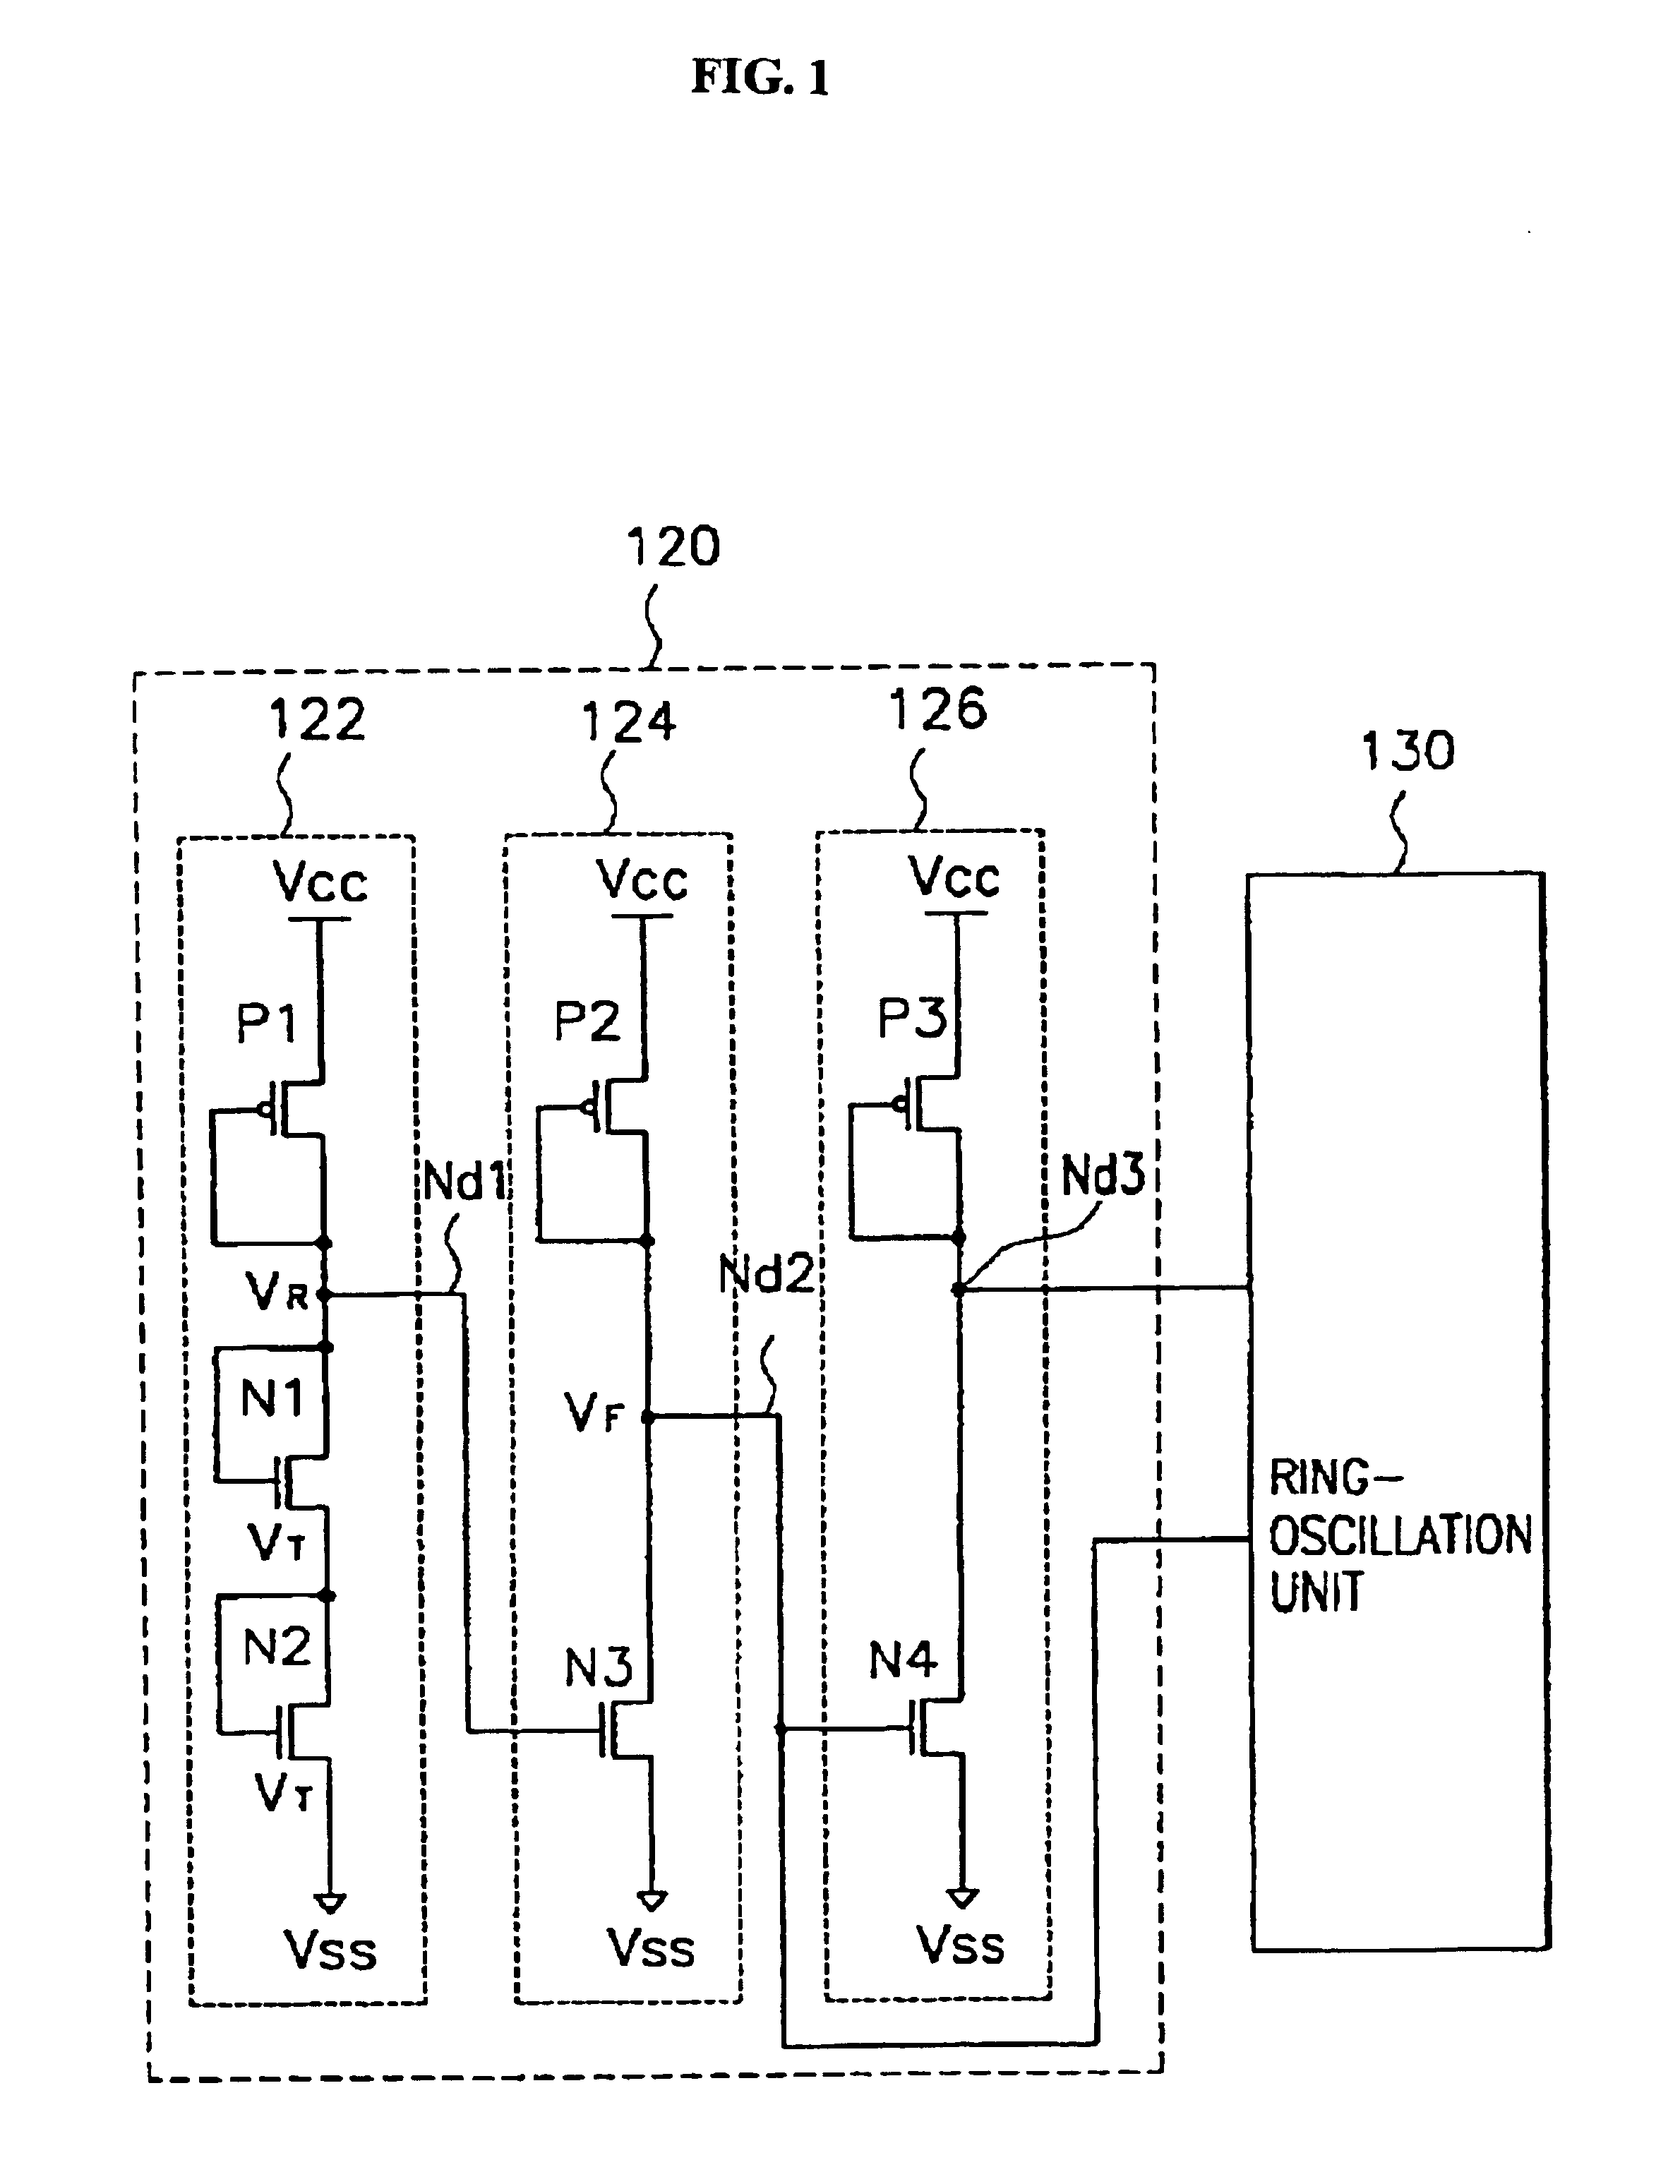 Circuit and method for self-refresh of DRAM cells through monitoring of cell leakage currents